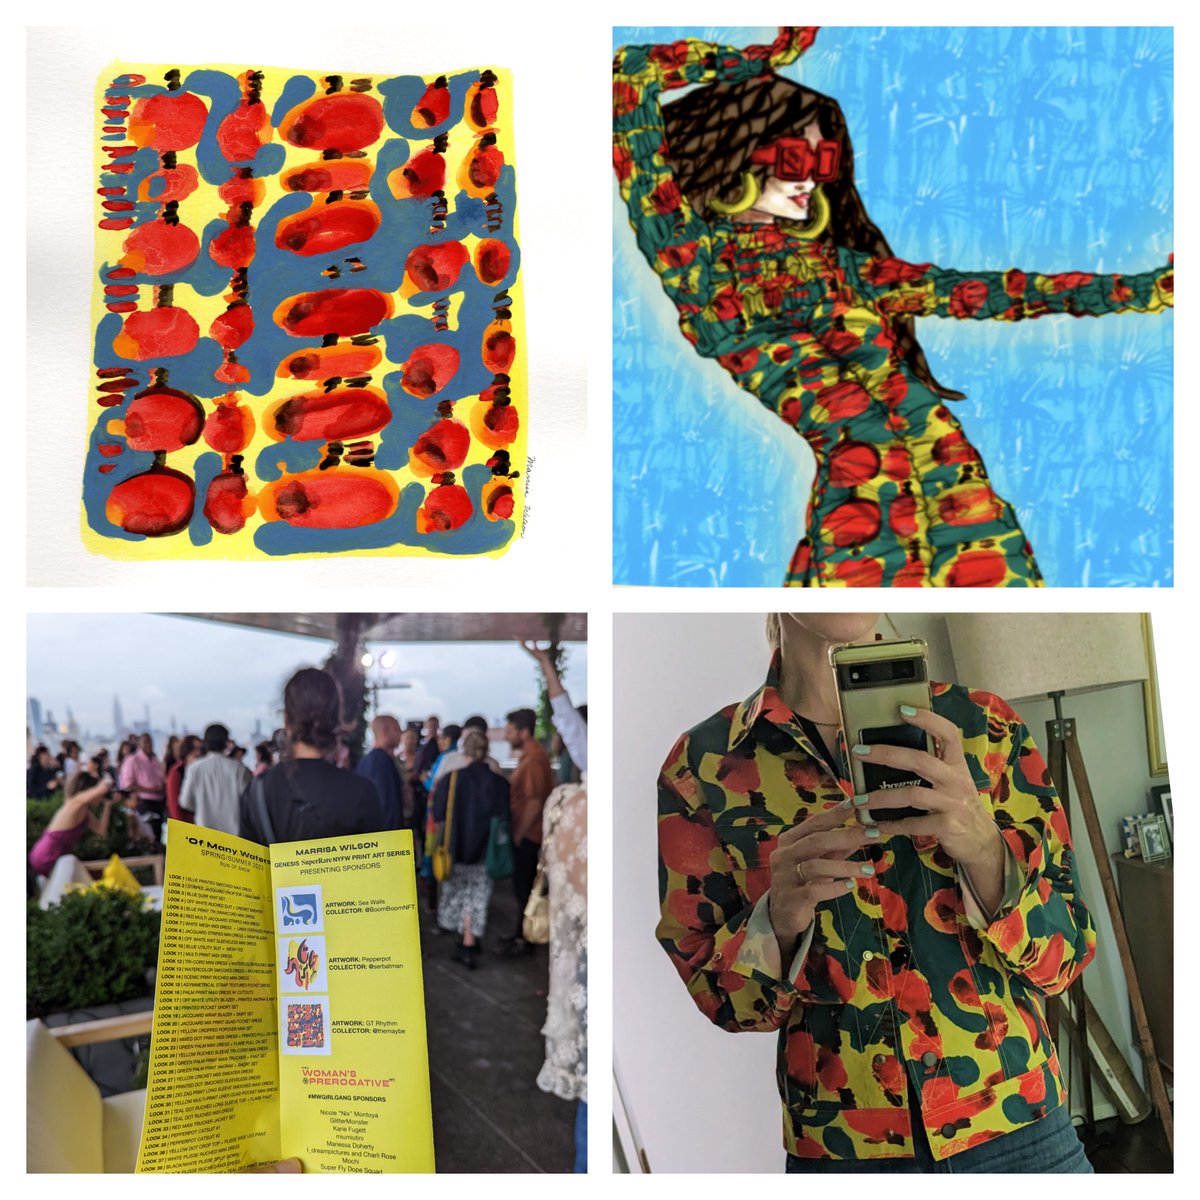 From JPEG to jacket - @MarrisaWilsonNY continues to innovate at the intersection of fashion and web3. The top left NFT got me into NYFW and a custom jacket in the same print. For good measure, I made sure to also scoop an illustration in the same pattern from her last drop